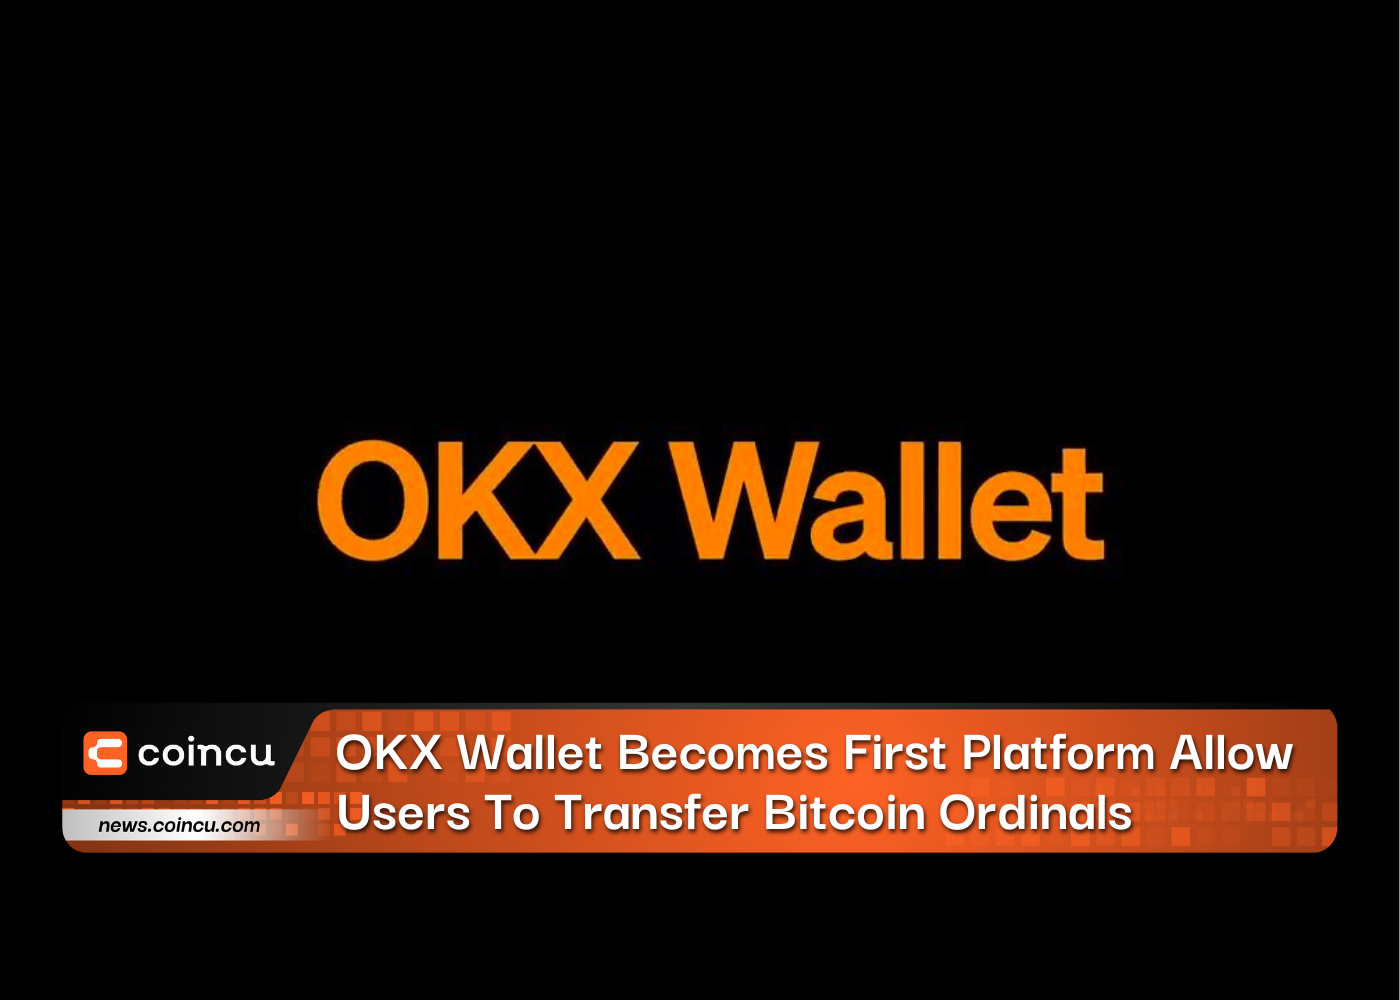 OKX Wallet Becomes First Platform Allow Users To Transfer Bitcoin Ordinals